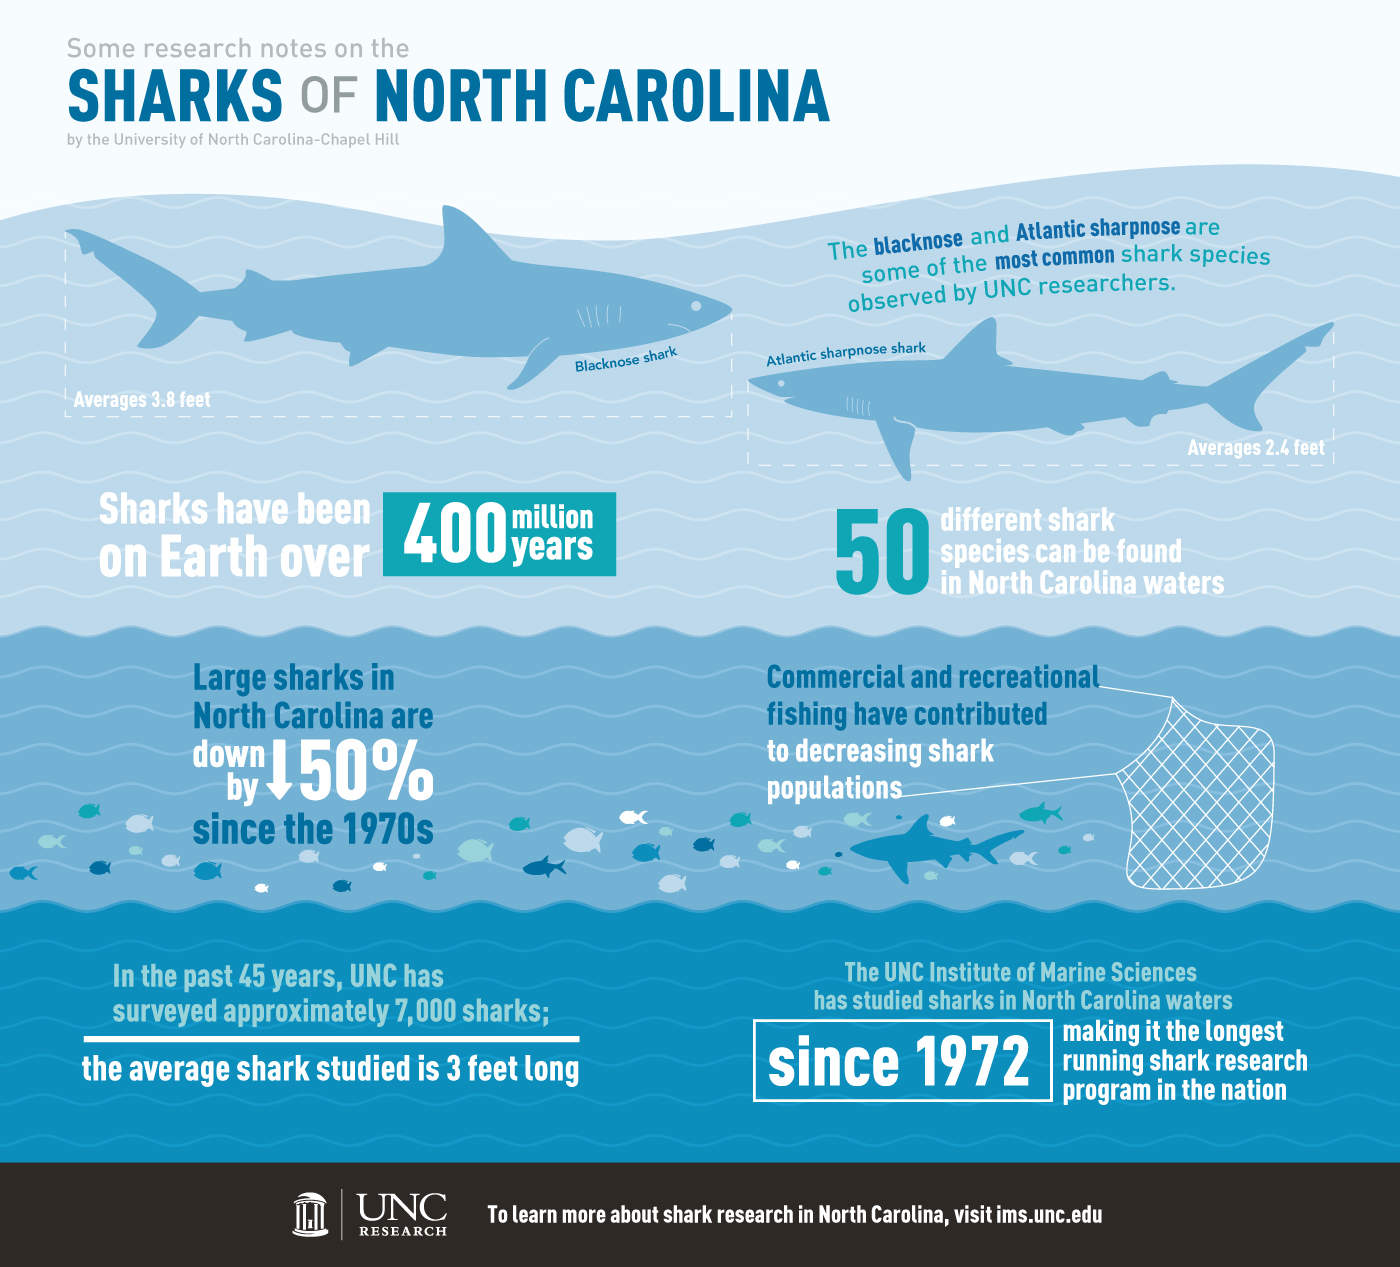 Sharks of North Carolina Infographic: Some Research notes on the Sharks of North Carolina by the University of North Carolina-Chapel Hill. The blacknose and Atlantic sharpenose are some of the most common shark species observed by UNC Researchers. Blacknose shark averages 8.3 feet and the Atlantic sharpnose shark averages 2.4 feet. Sharks have been on Earth over 400 million year. 50 different shark species can be found in North Carolina waters. Large sharks in North Carolina are down by 50% since the 1970s. Commercial and recreational fishing have contributed to decreasing shark populations. In the past 45 years, UNC has surveyed approximately 7,000 sharks; the average shark studies is 3 feet long. The UNC institute of Marine Sciences has studies sharks in North Carolina waters since 1972, making it the longest running shark research program in the nation. To learn more about shark research in North Carolina, visit imc dot unc dot edu.